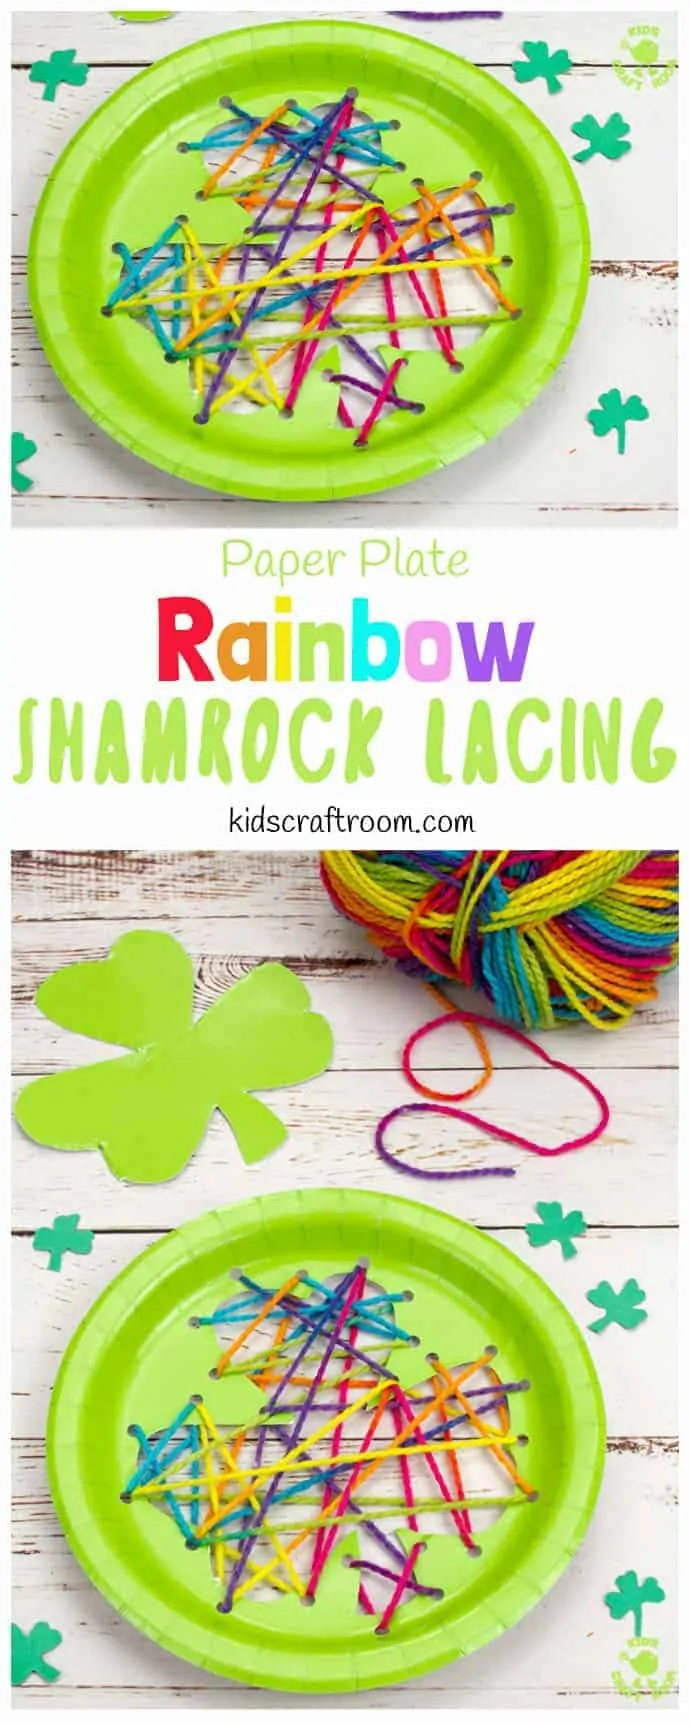 This paper plate St Patrick's Day Shamrock Lacing Craft is fun for kids to practise fine motor skills as they lace and sew a colourful rainbow shamrock leaf! An easy St Patrick's Day craft for kids. Paper plate crafts are so fun! #kidscraftroom #shamrock #stpatricksdaycrafts #stpatricksdaydecorations #paperplatecrafts #kidscrafts #preschoolcrafts